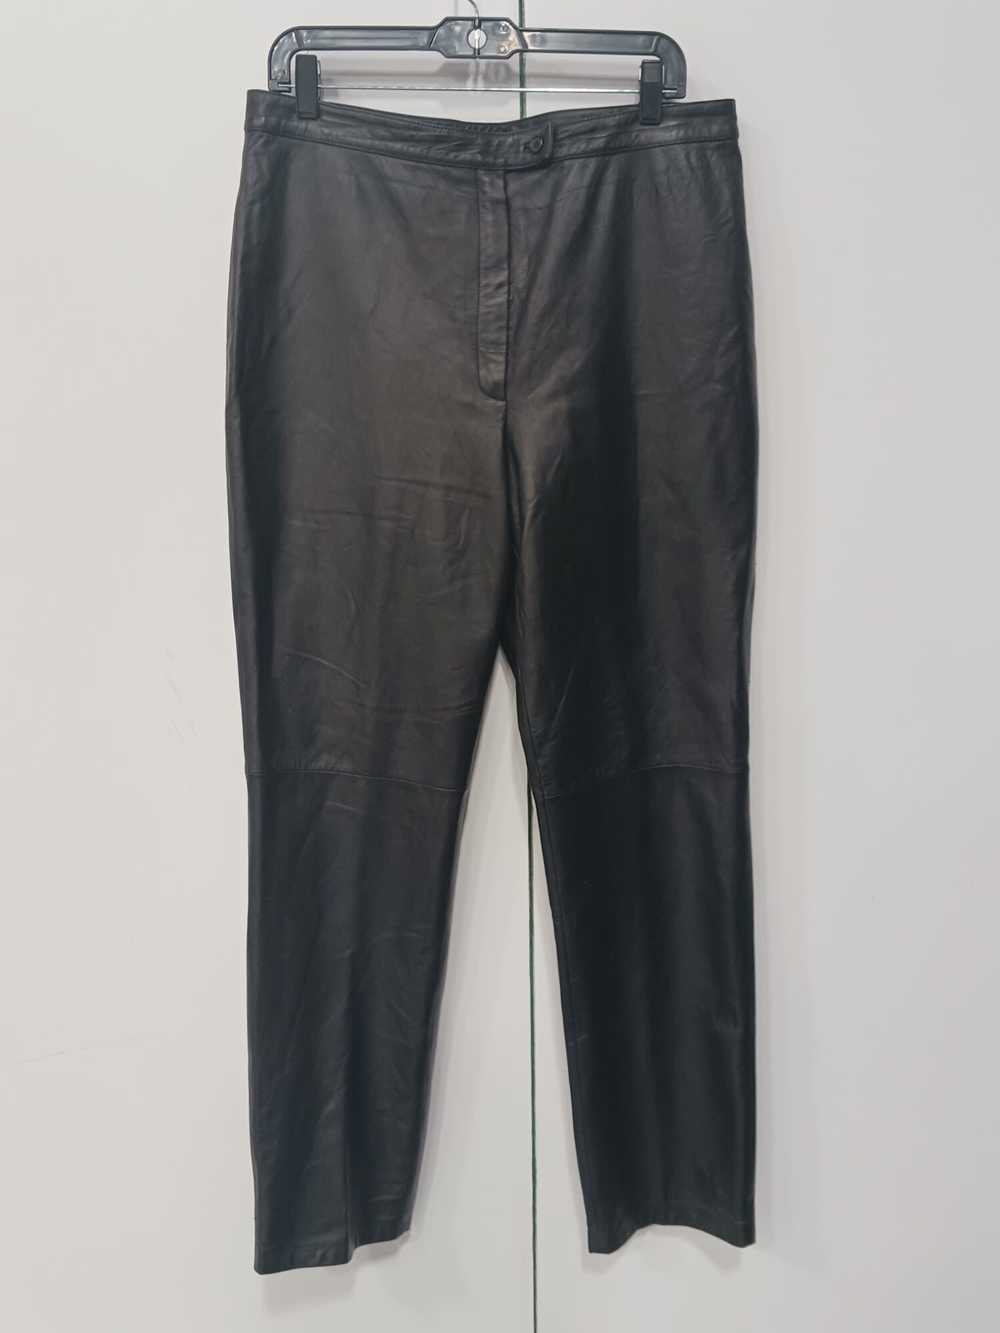 Real Clothes Women's Leather Pants Size 14 - image 1